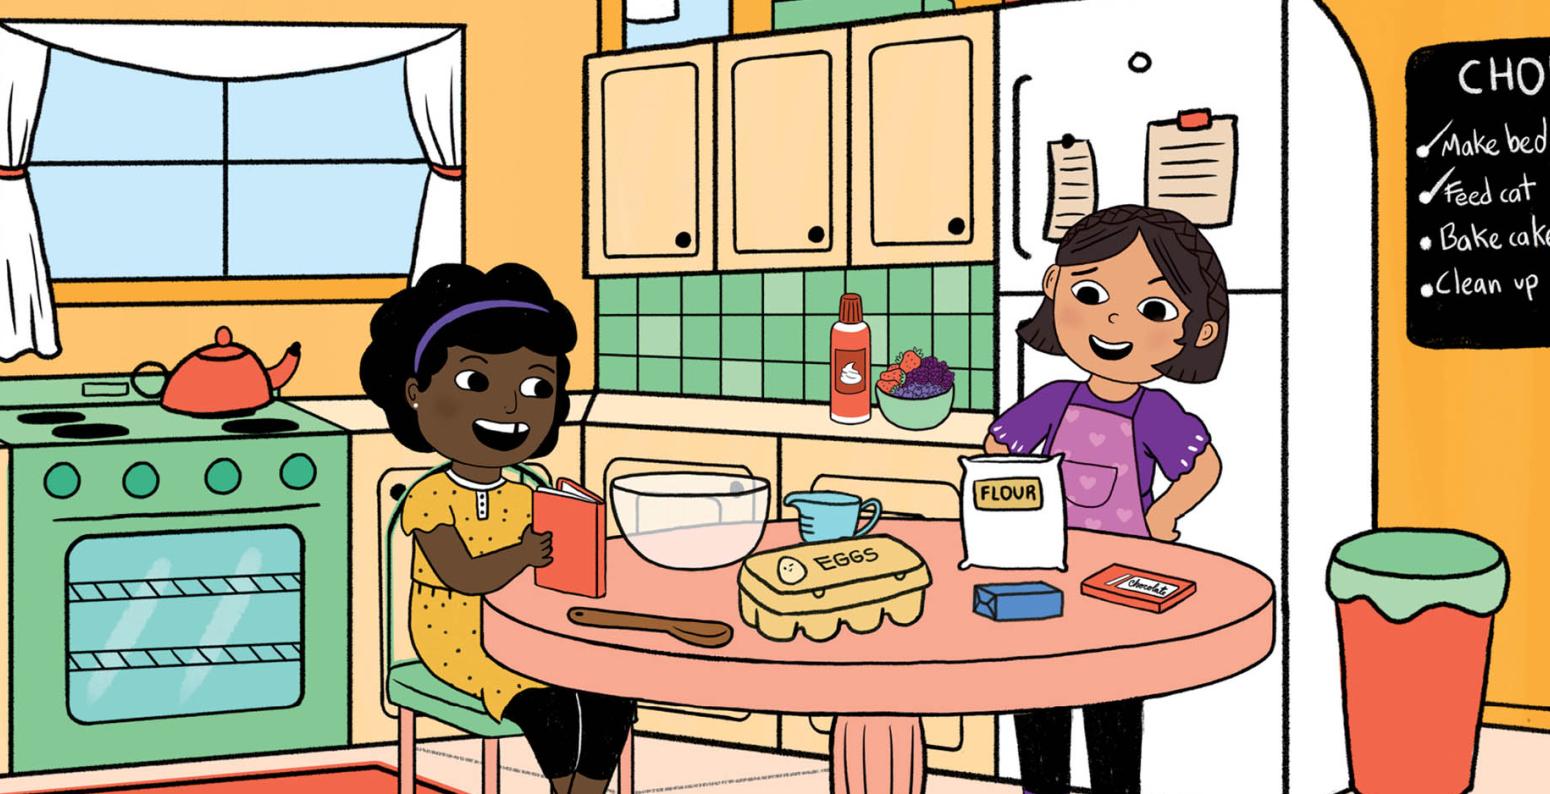 Two young friends, April and Mae, are at a kitchen table. One reads while the other one bakes.